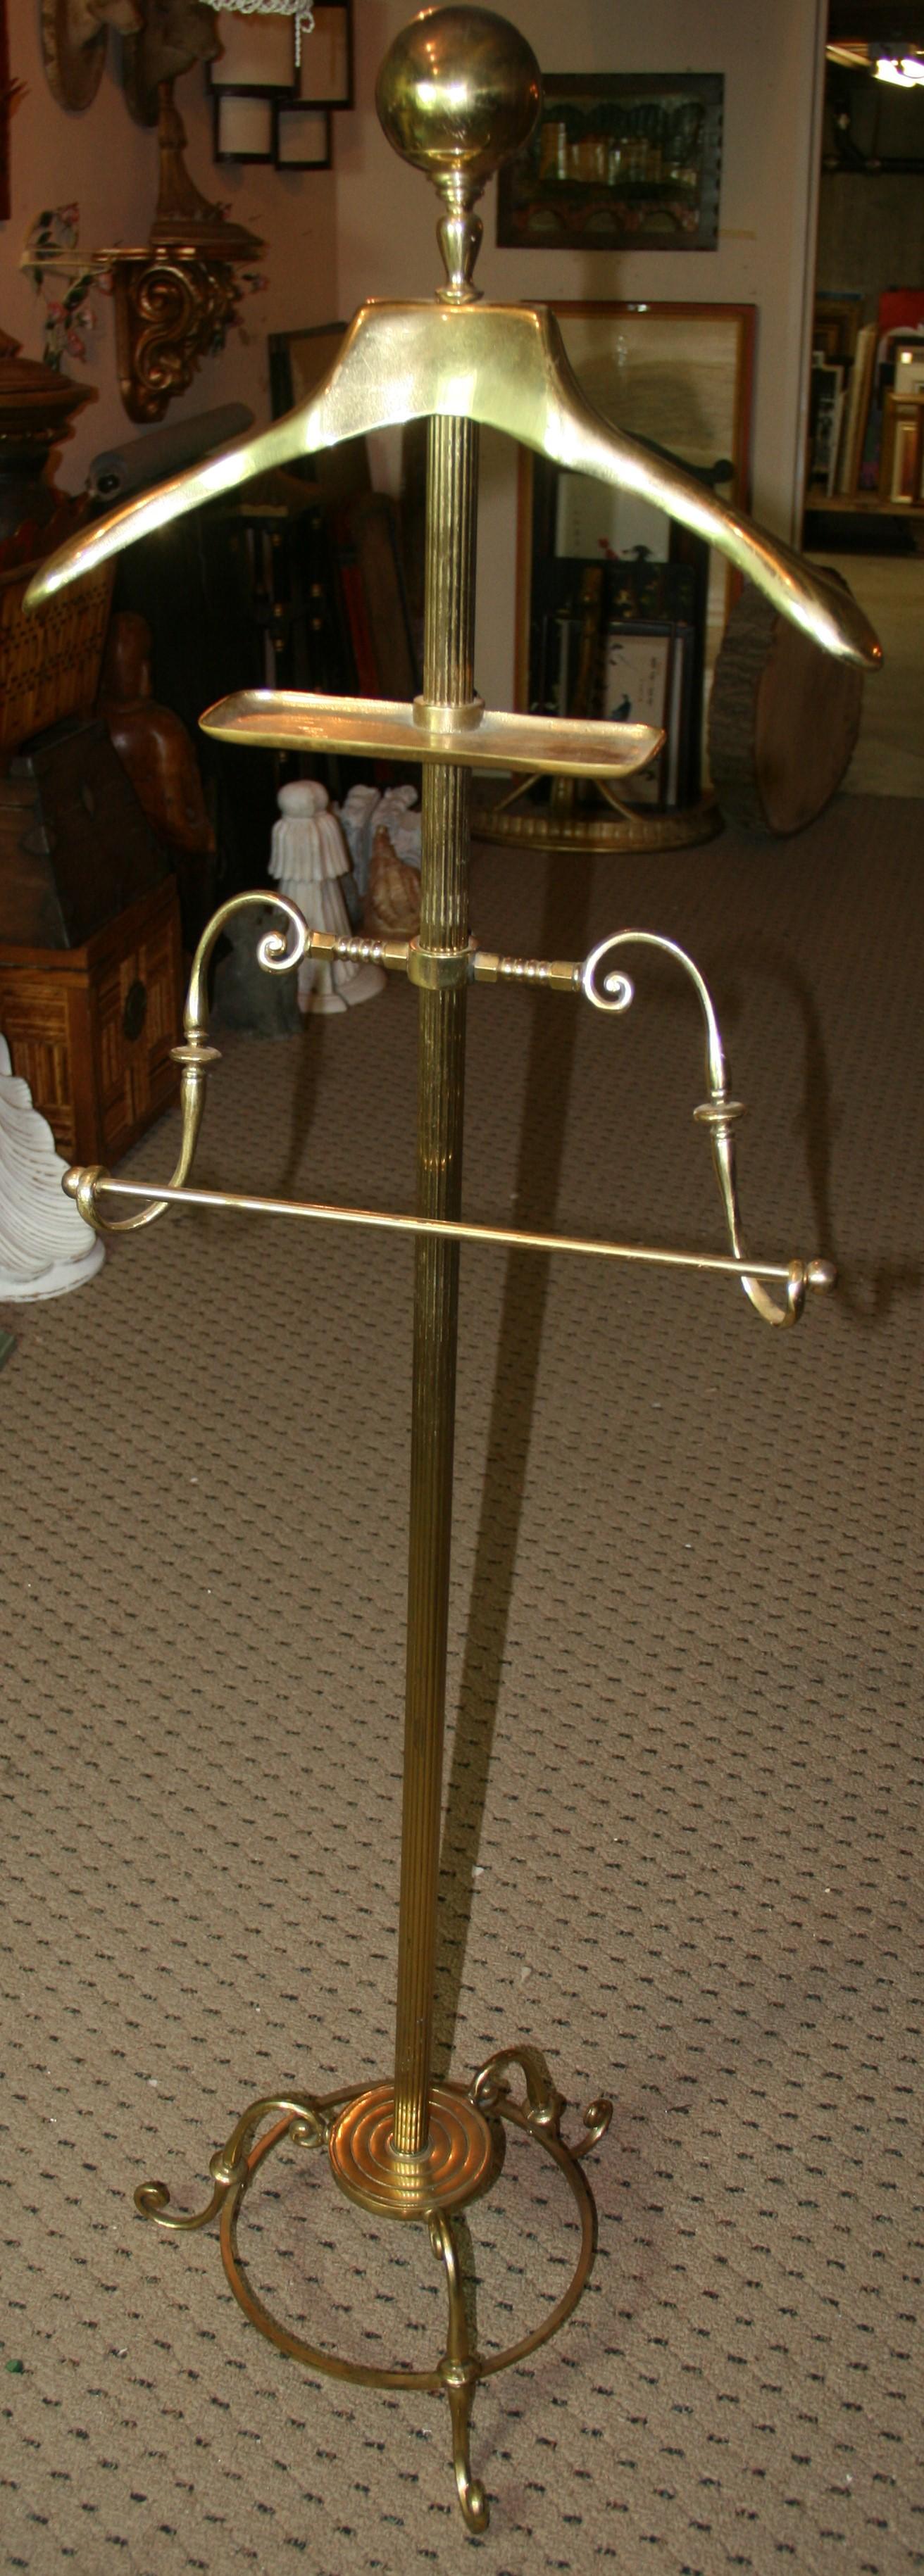 Mid-20th Century Art Deco Style Solid Brass Valet Stand 1960's For Sale